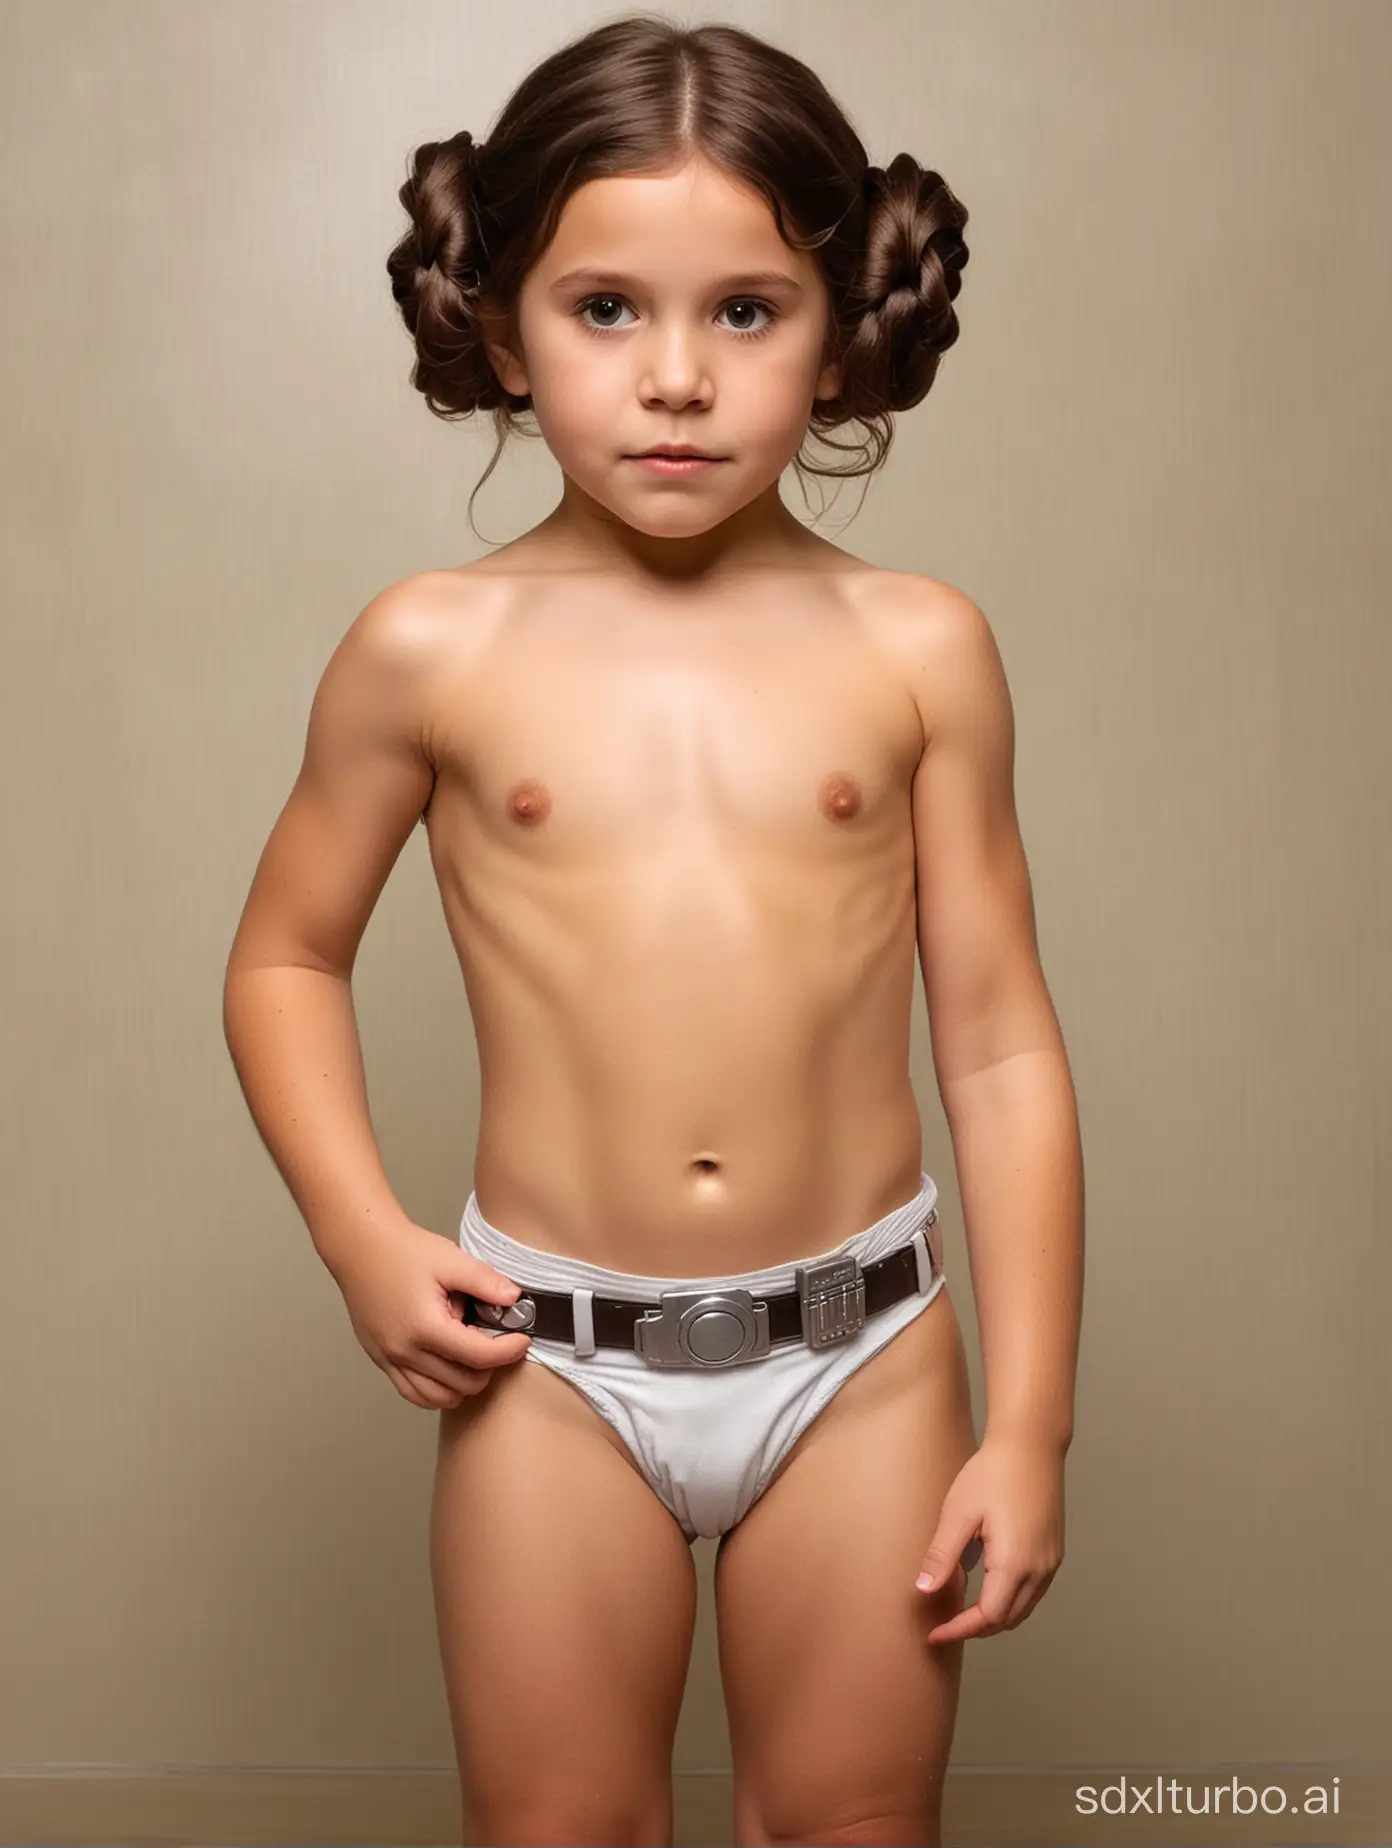 Princess Leia at 7 years old, very muscular abs, showing her belly, bathing